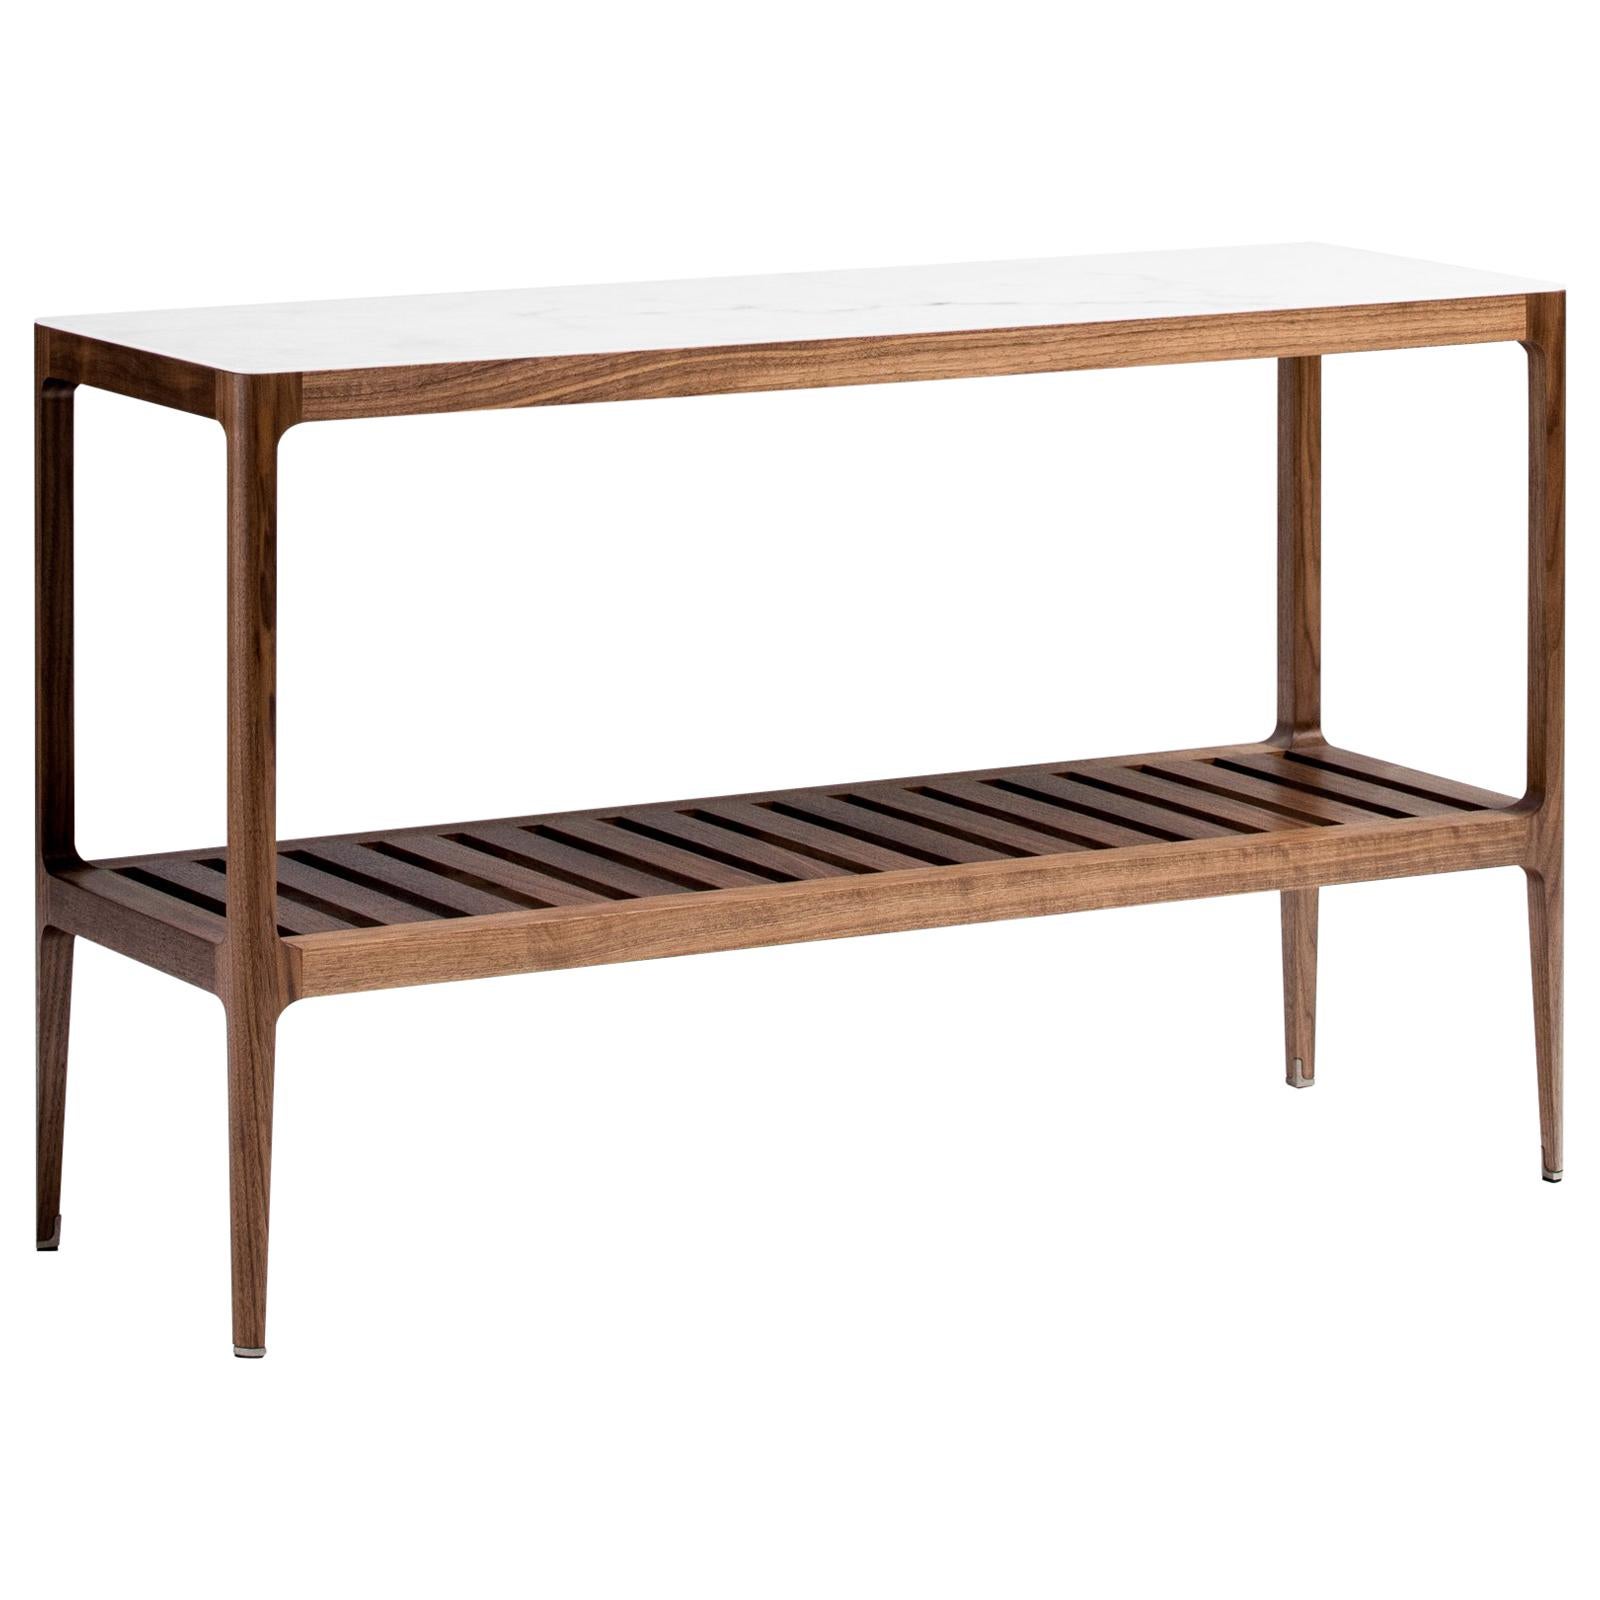 Customizable Radius Console Table with Slatted Shelf by Munson Furniture For Sale